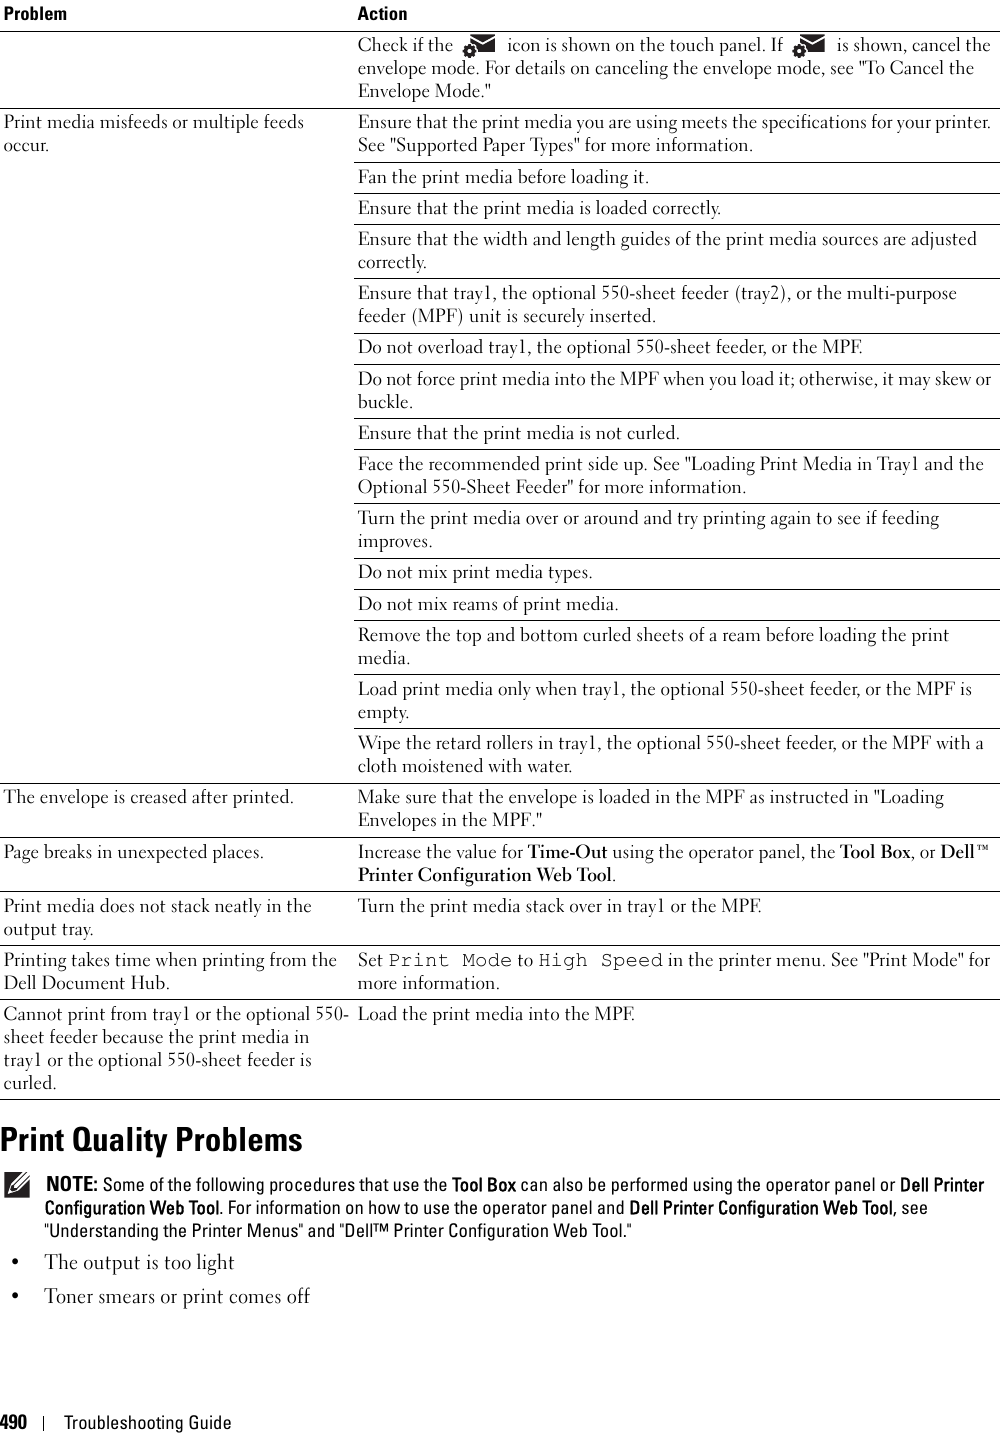 490Troubleshooting GuidePrint Quality Problems NOTE: Some of the following procedures that use the Tool Box can also be performed using the operator panel or Dell Printer Configuration Web Tool. For information on how to use the operator panel and Dell Printer Configuration Web Tool, see &quot;Understanding the Printer Menus&quot; and &quot;Dell™ Printer Configuration Web Tool.&quot;• The output is too light• Toner smears or print comes offCheck if the   icon is shown on the touch panel. If   is shown, cancel the envelope mode. For details on canceling the envelope mode, see &quot;To Cancel the Envelope Mode.&quot;Print media misfeeds or multiple feeds occur.Ensure that the print media you are using meets the specifications for your printer. See &quot;Supported Paper Types&quot; for more information.Fan the print media before loading it.Ensure that the print media is loaded correctly.Ensure that the width and length guides of the print media sources are adjusted correctly.Ensure that tray1, the optional 550-sheet feeder (tray2), or the multi-purpose feeder (MPF) unit is securely inserted.Do not overload tray1, the optional 550-sheet feeder, or the MPF.Do not force print media into the MPF when you load it; otherwise, it may skew or buckle.Ensure that the print media is not curled.Face the recommended print side up. See &quot;Loading Print Media in Tray1 and the Optional 550-Sheet Feeder&quot; for more information.Turn the print media over or around and try printing again to see if feeding improves.Do not mix print media types.Do not mix reams of print media.Remove the top and bottom curled sheets of a ream before loading the print media.Load print media only when tray1, the optional 550-sheet feeder, or the MPF is empty.Wipe the retard rollers in tray1, the optional 550-sheet feeder, or the MPF with a cloth moistened with water.The envelope is creased after printed. Make sure that the envelope is loaded in the MPF as instructed in &quot;Loading Envelopes in the MPF.&quot;Page breaks in unexpected places. Increase the value for Time-Out using the operator panel, the Tool Box, or Dell™ Printer Configuration Web Tool. Print media does not stack neatly in the output tray.Turn the print media stack over in tray1 or the MPF.Printing takes time when printing from the Dell Document Hub.Set Print Mode to High Speed in the printer menu. See &quot;Print Mode&quot; for more information.Cannot print from tray1 or the optional 550-sheet feeder because the print media in tray1 or the optional 550-sheet feeder is curled.Load the print media into the MPF.Problem Action